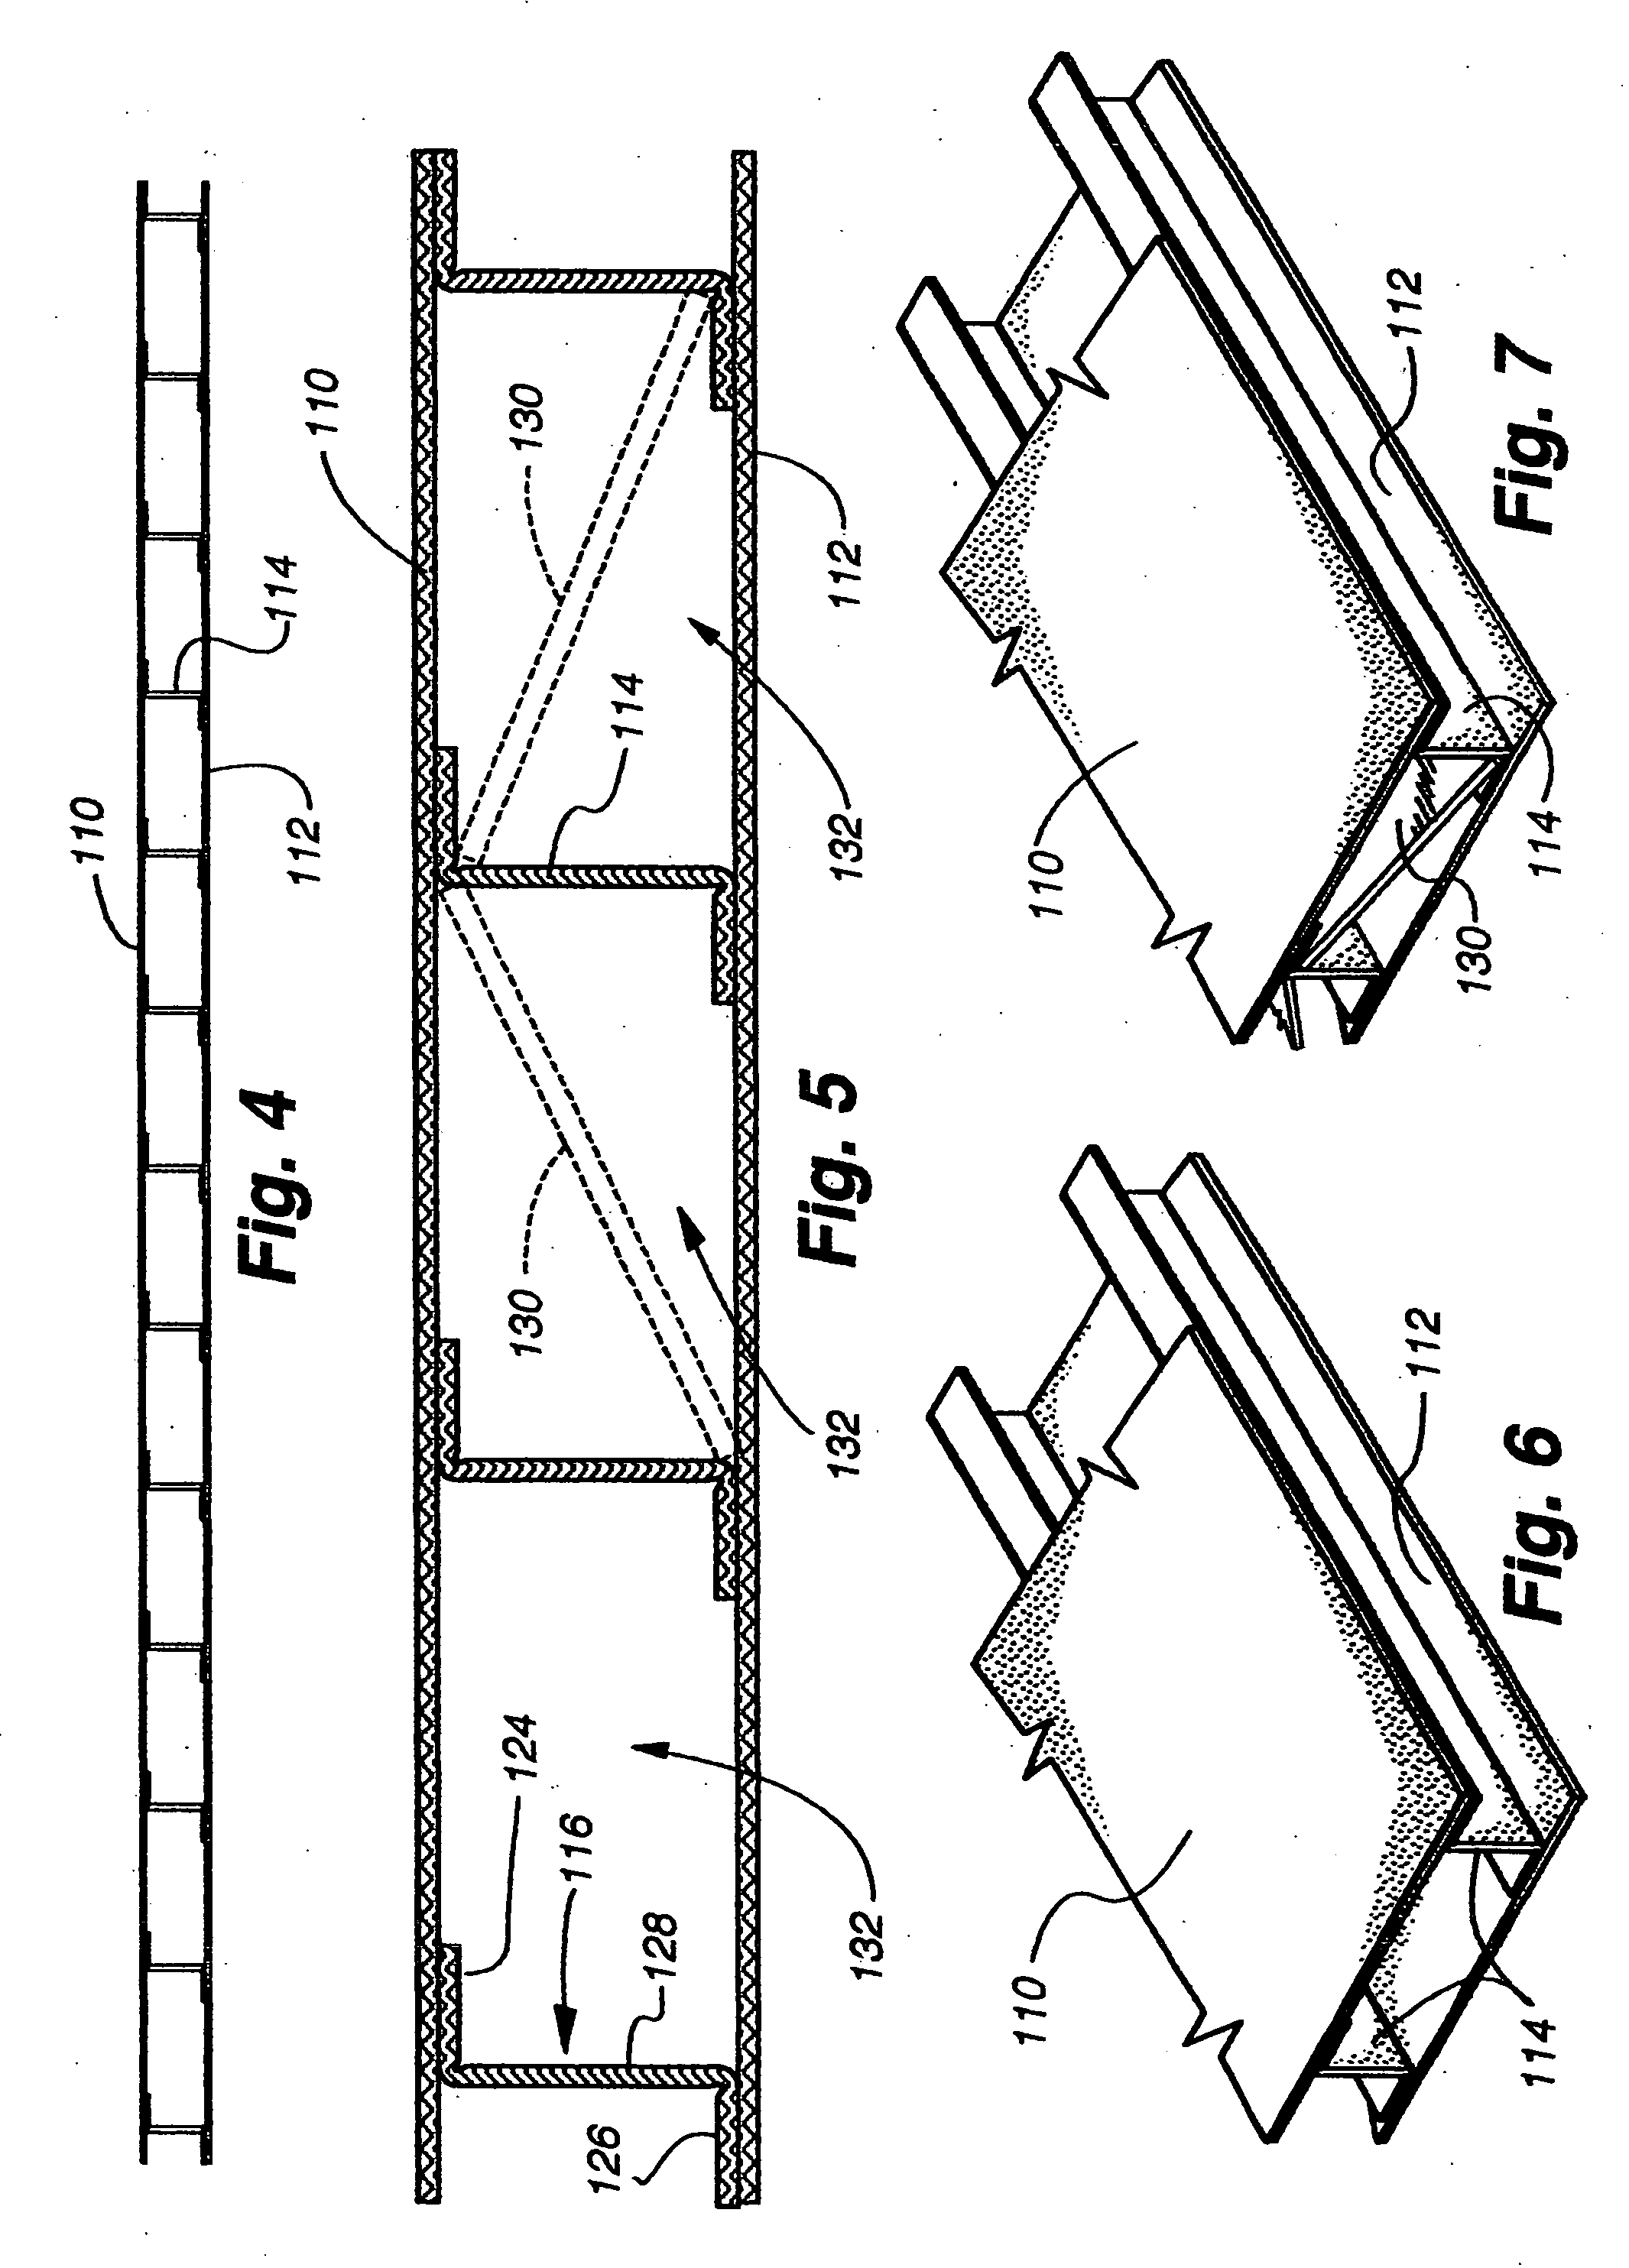 Ceiling system with replacement panels